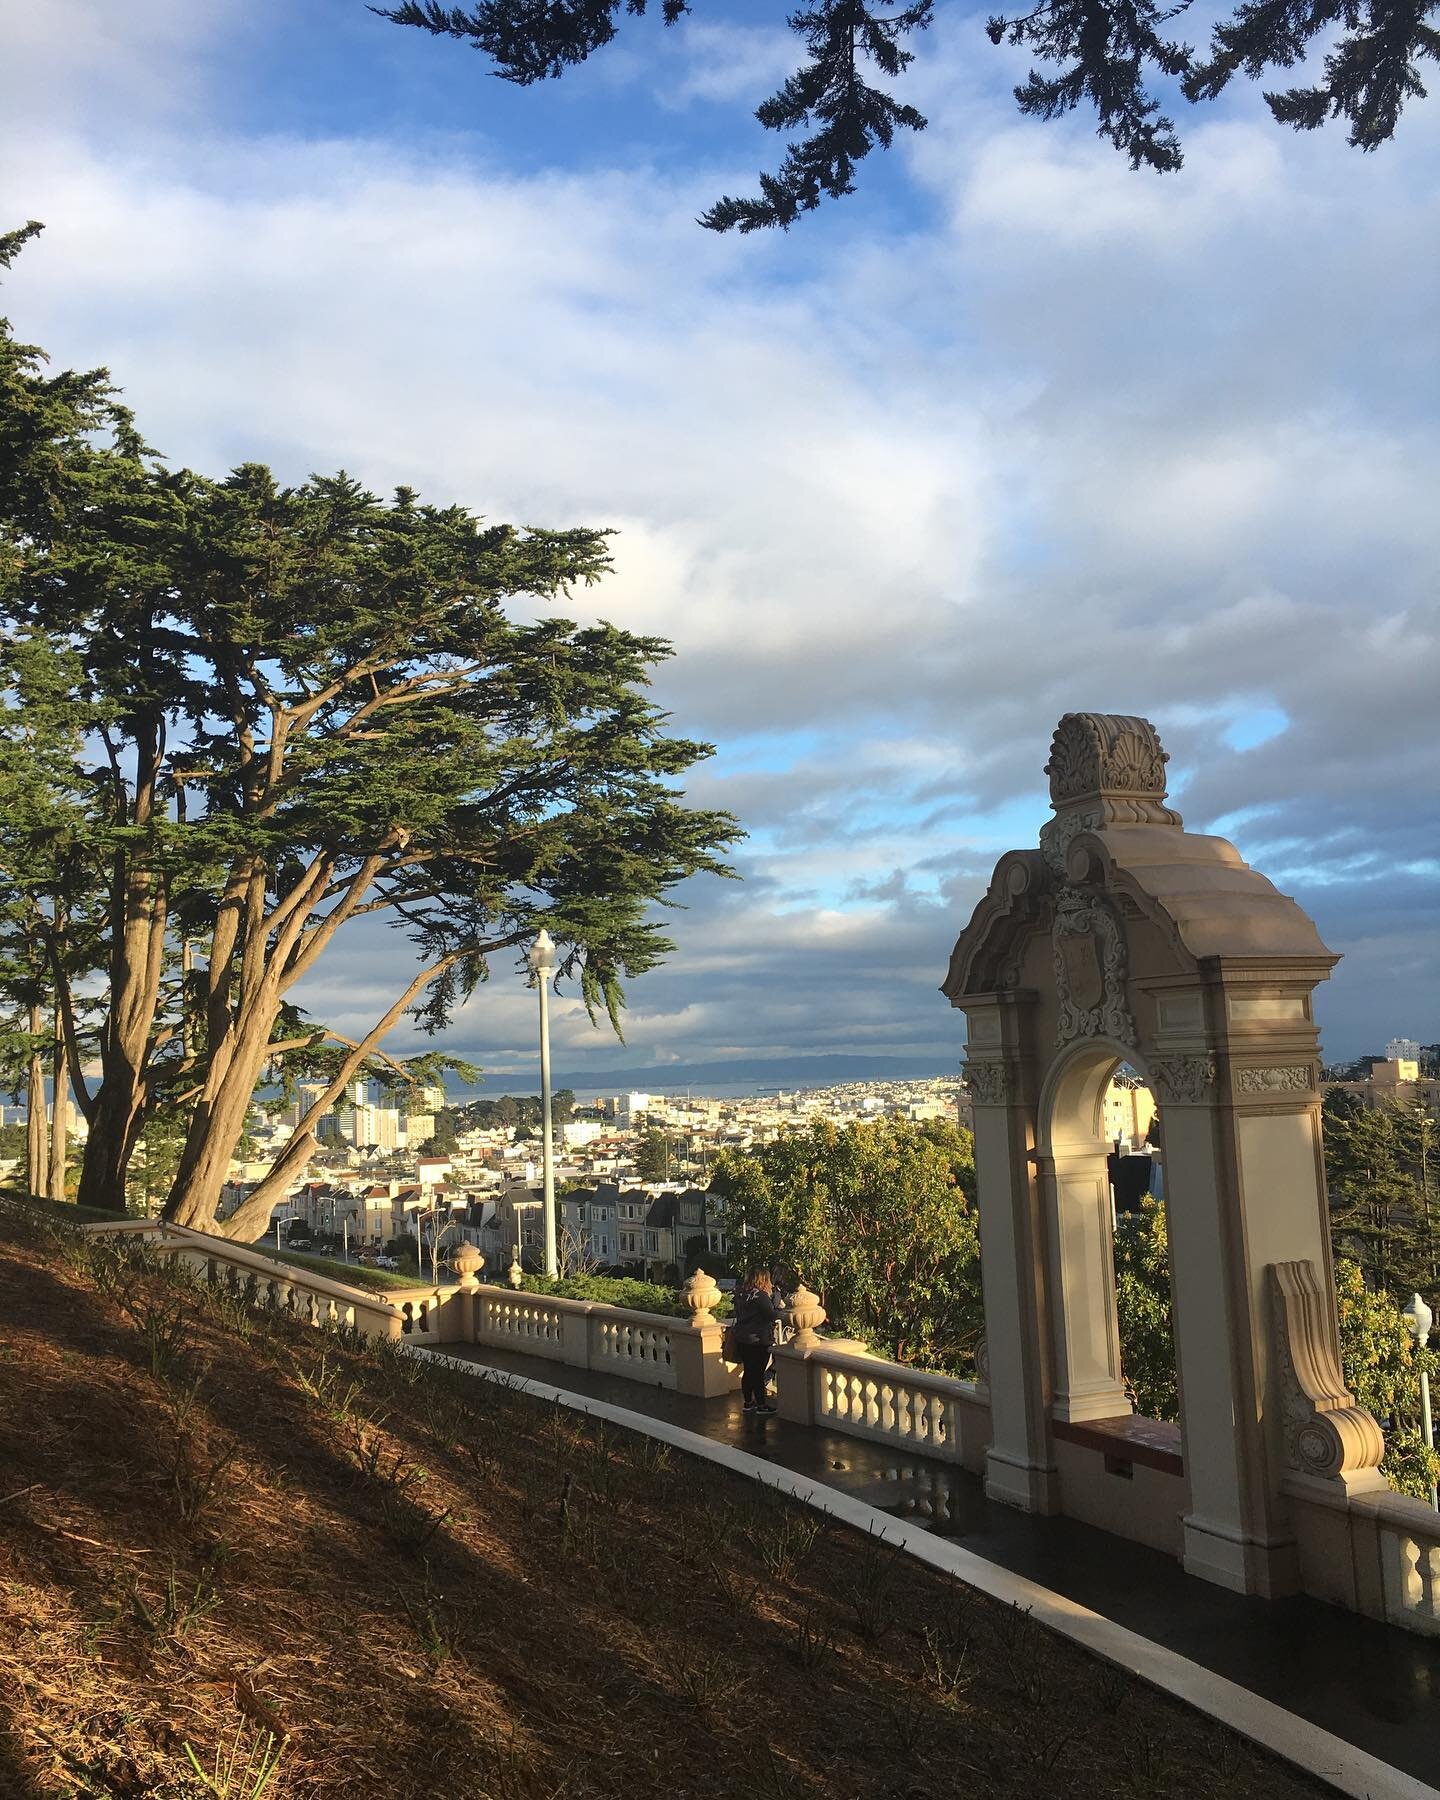 What college are you visiting today?
#campustours #collegevisit #tbt at Lone Mountain @usfca #sanfrancisco